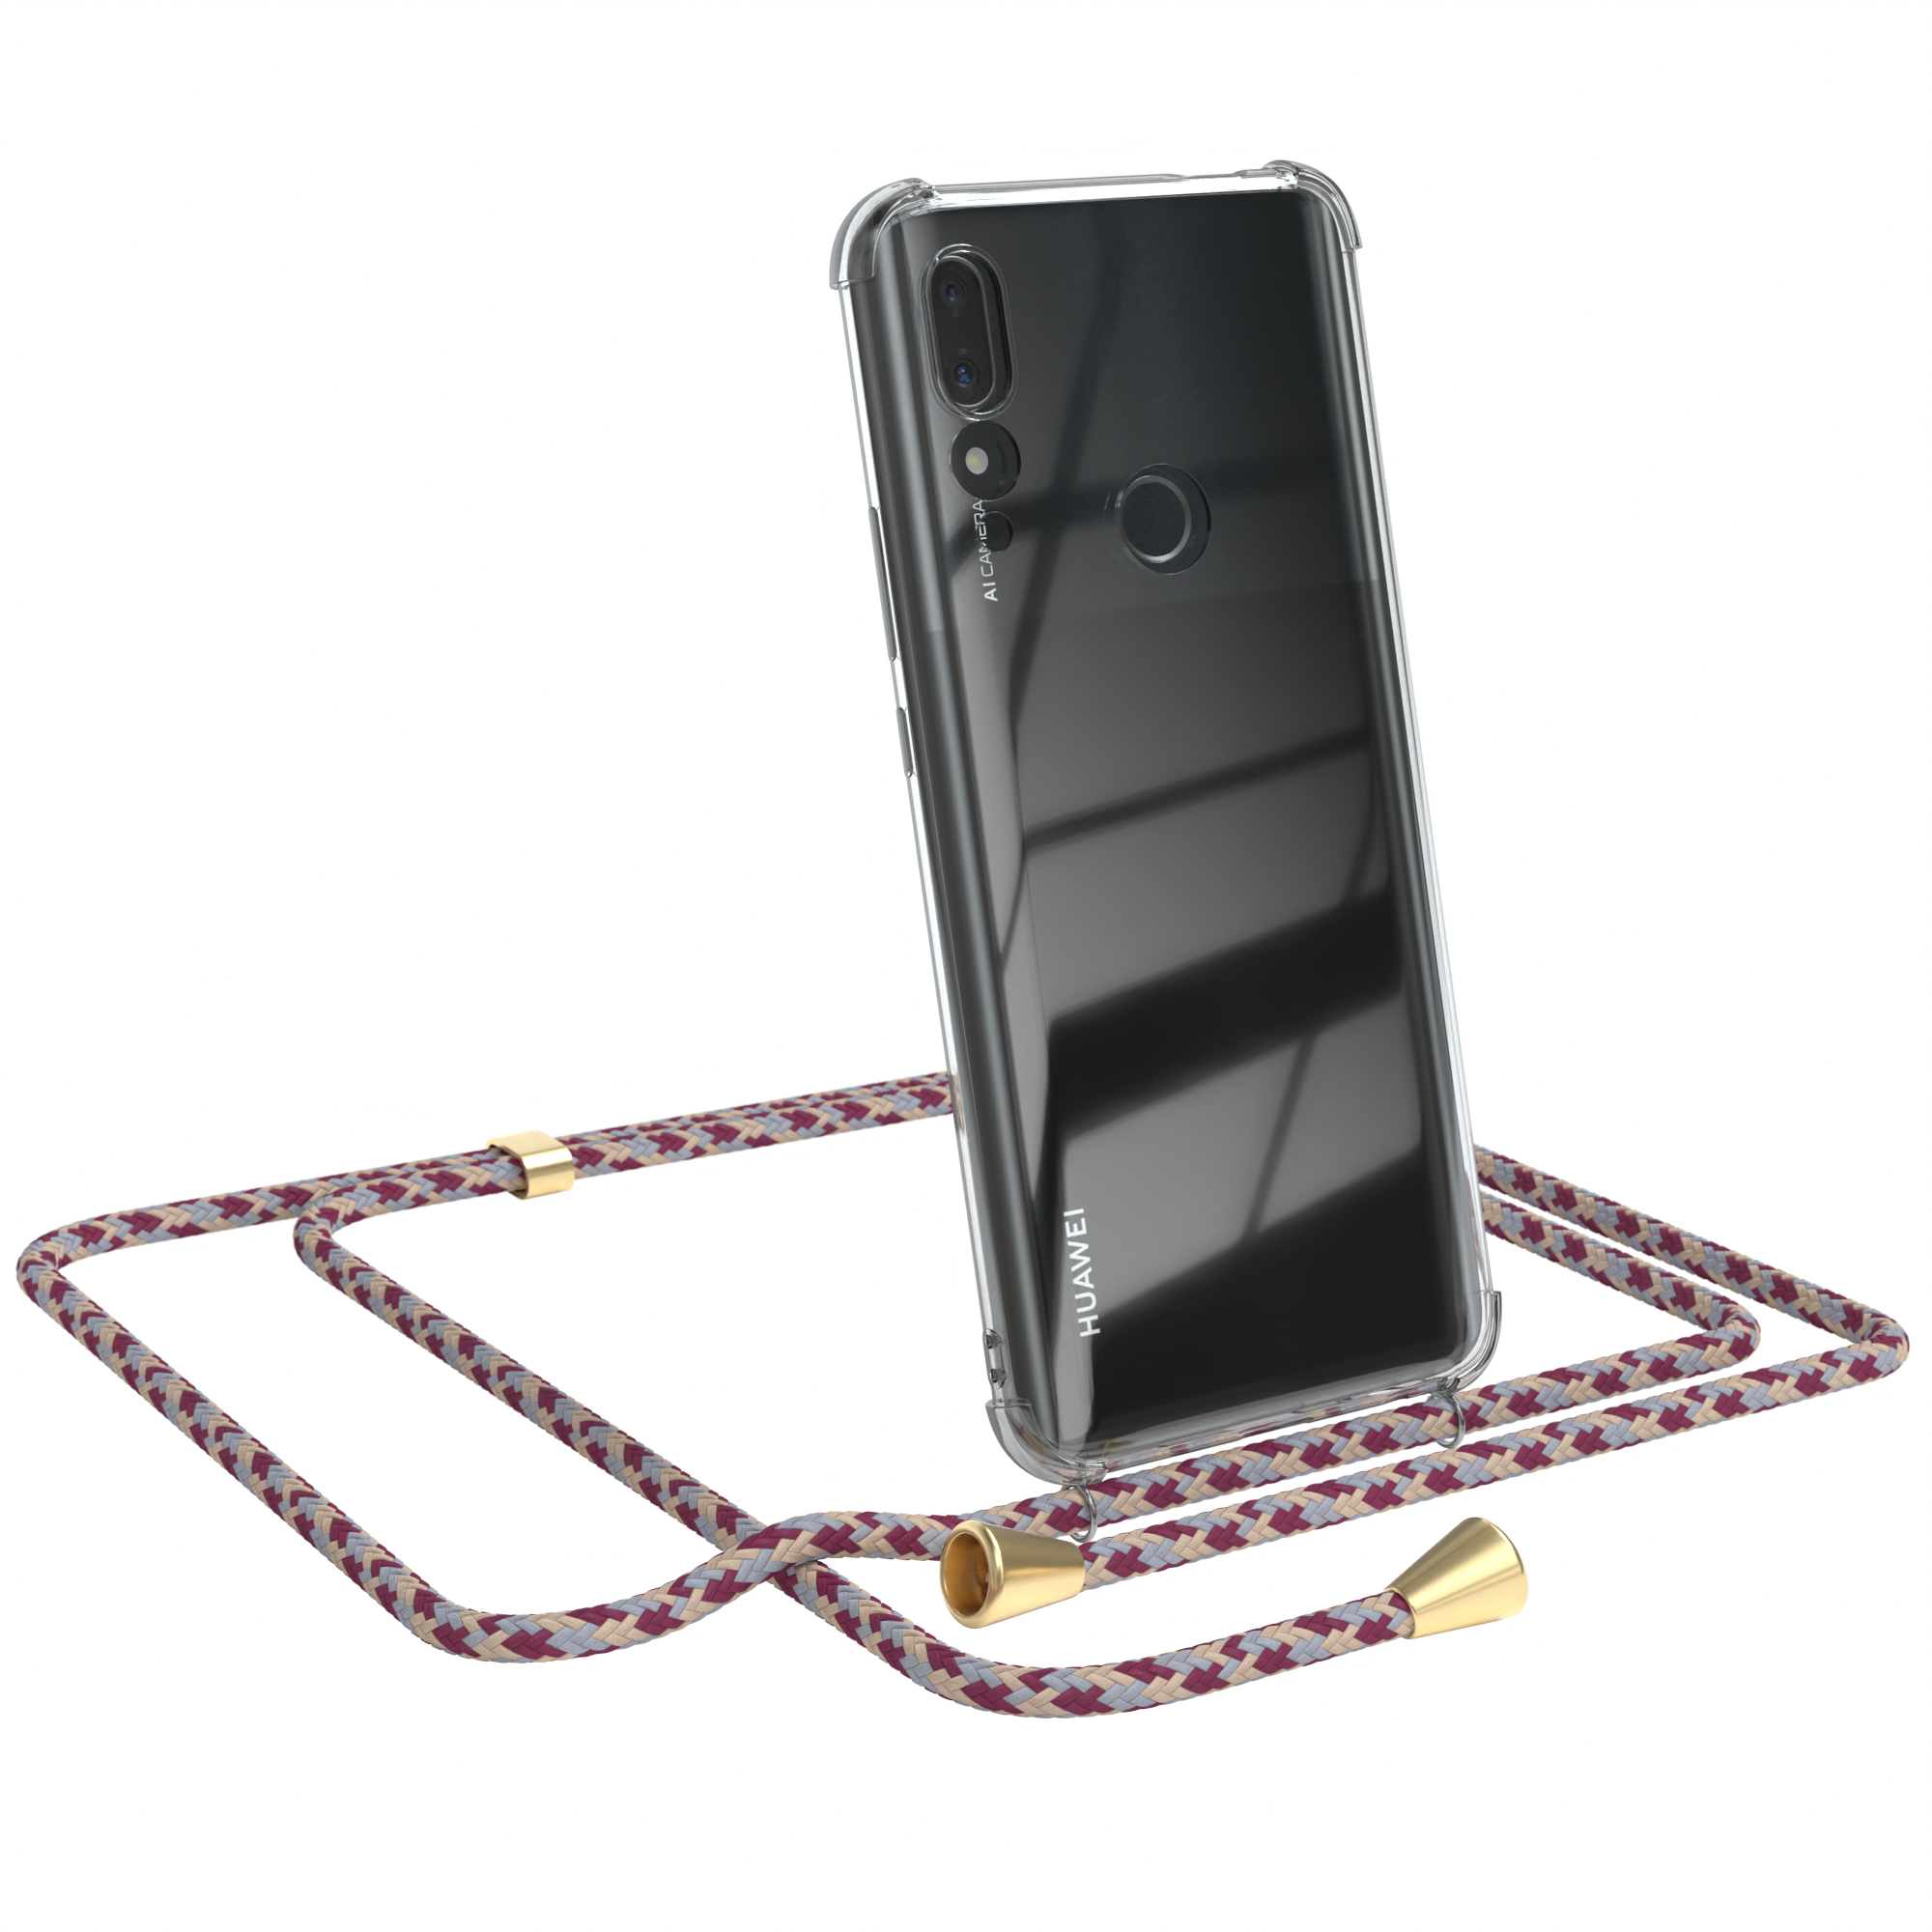 / Clips mit Cover Y9 Clear Umhängetasche, EAZY Prime Beige P Rot Gold Camouflage CASE Umhängeband, Huawei, Smart (2019), Z /